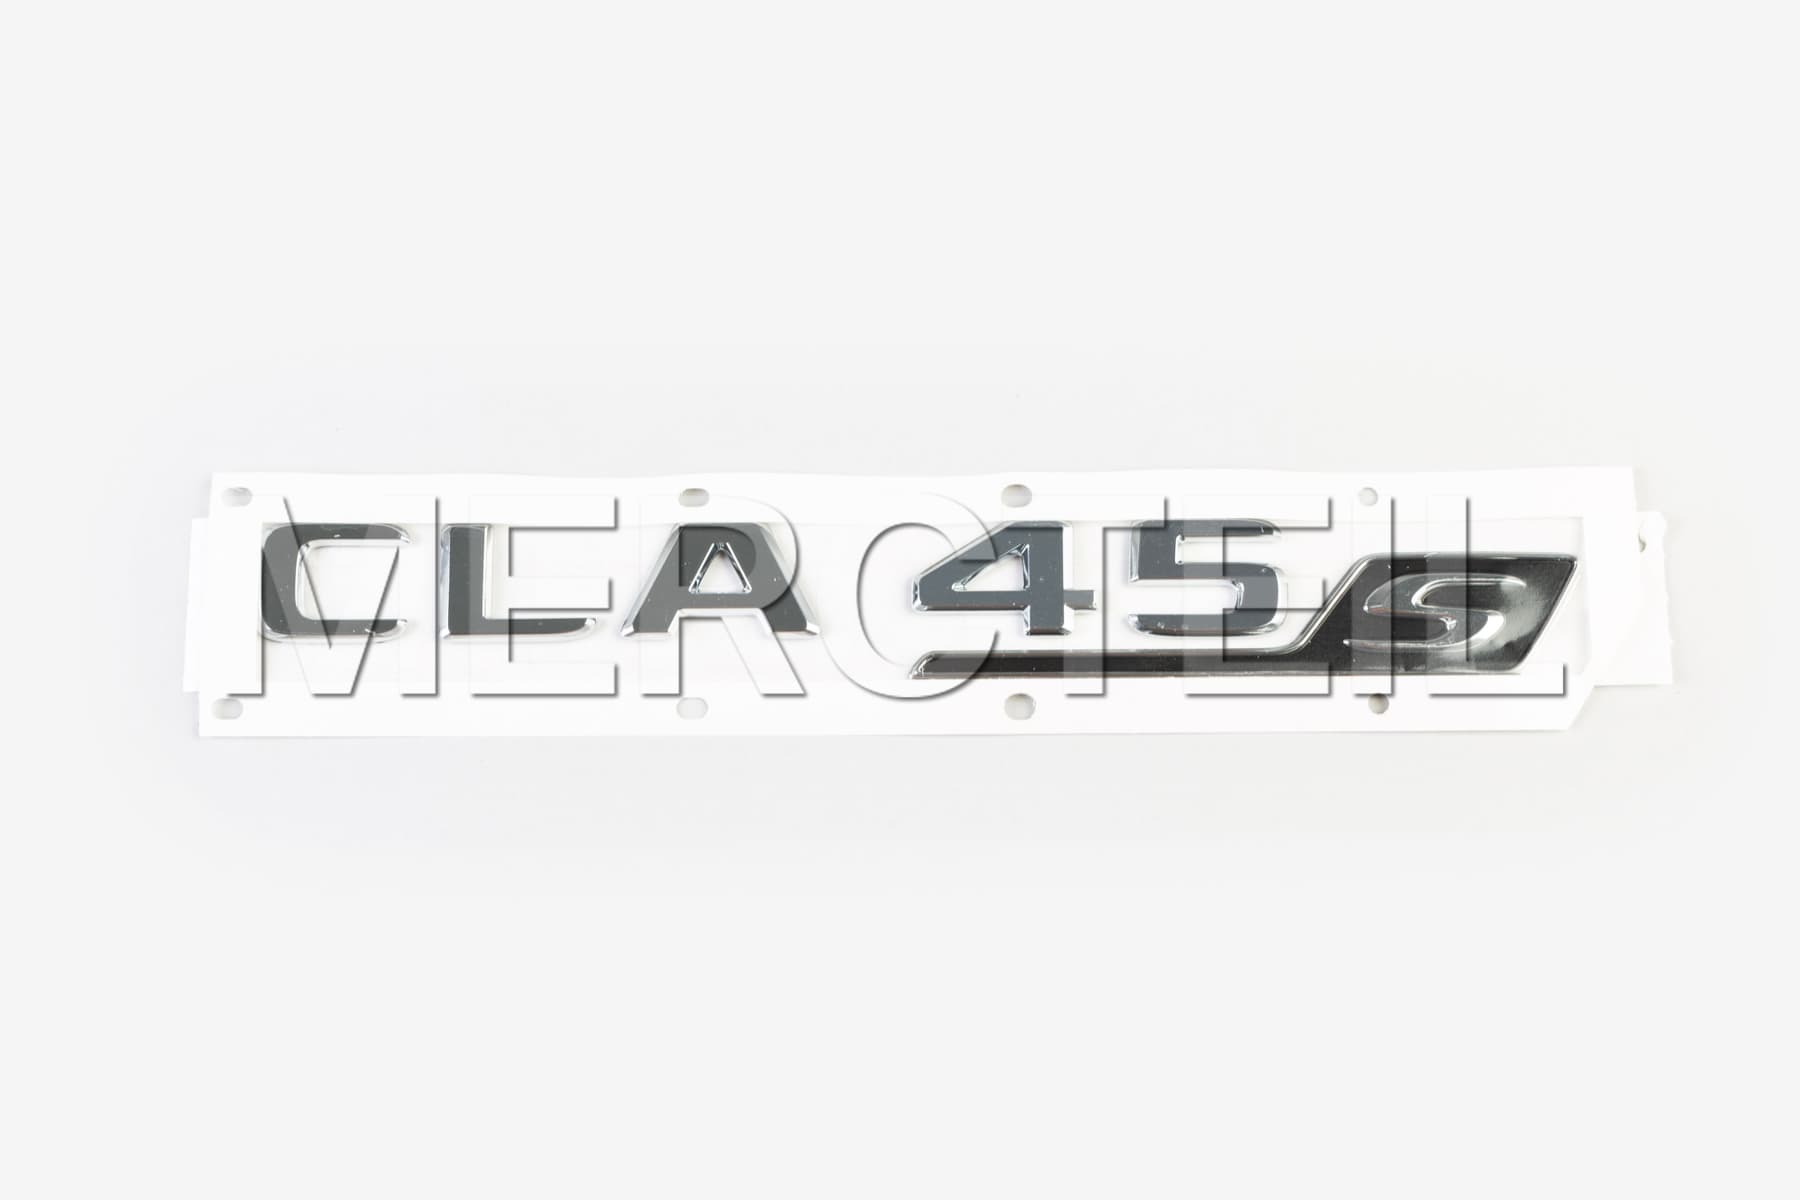 CLA45 Model Logo Decal C118 X118 Genuine Mercedes AMG (part number: 	
A1188172100)